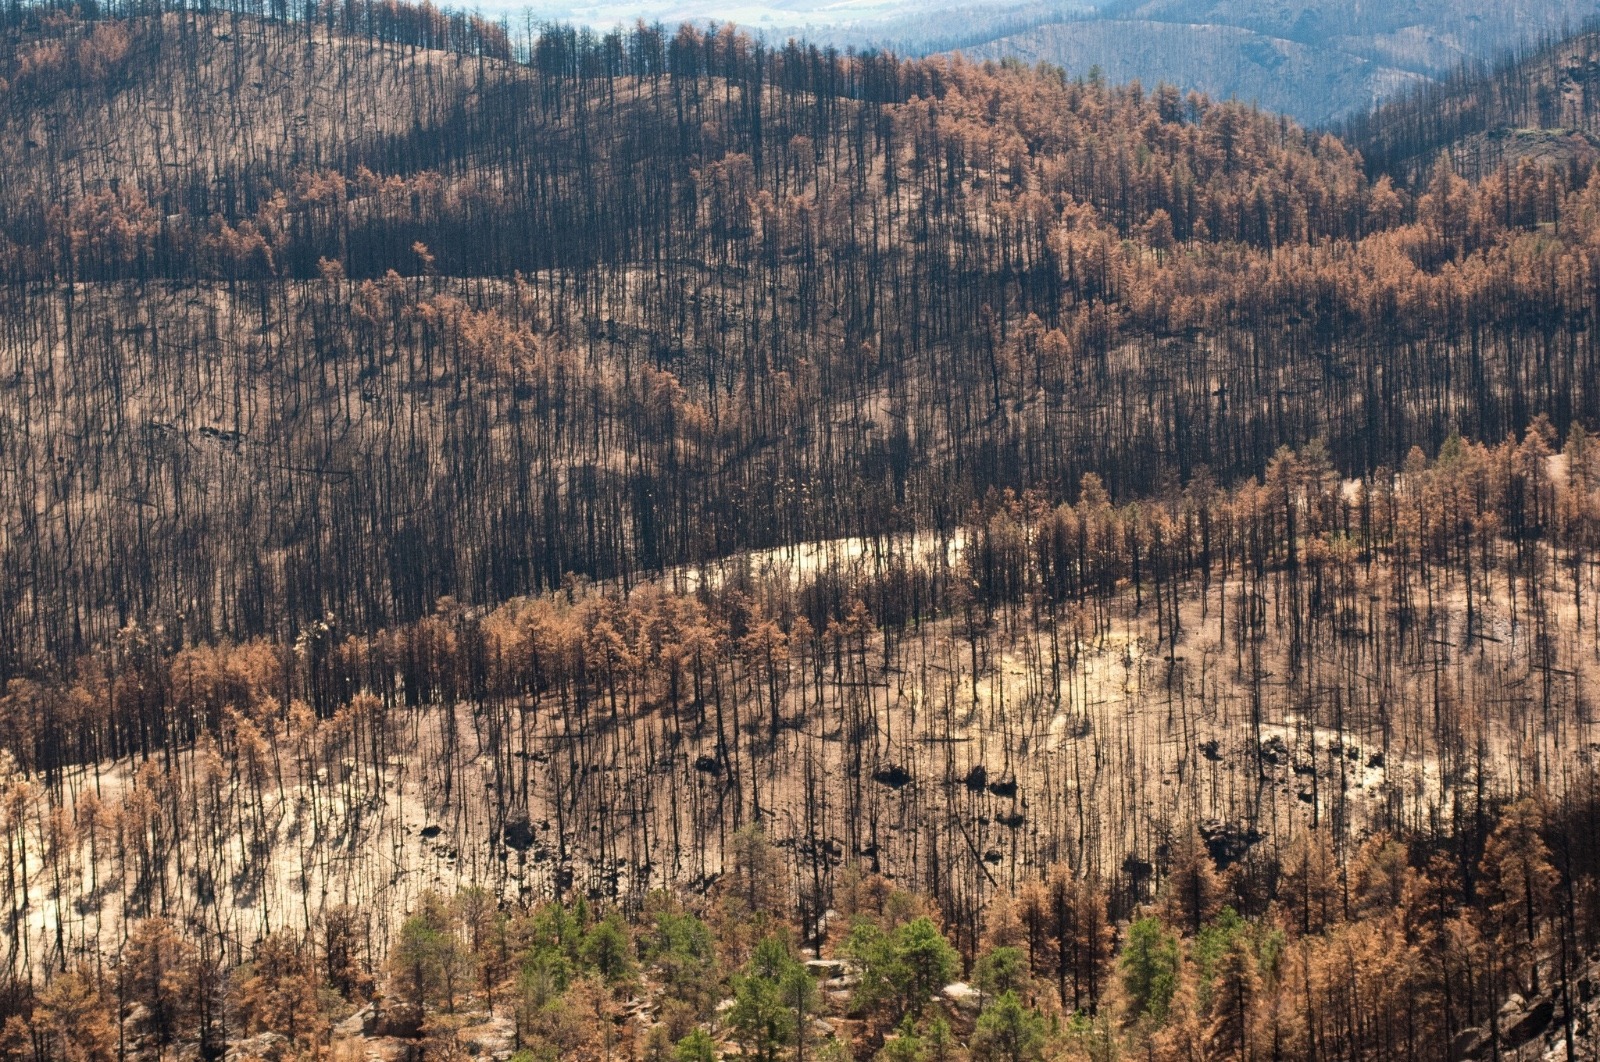 As western forests dry, trees become weakened and, as Olsen says, are &quot;sitting ducks&quot; for outbreaks of voracious mountain beetles. If lack of moisture doesn't kill trees, insects will, leaving forests with dead needs temporarily more susceptible to burning.  Photo of national forest in Colorado courtesy USDA